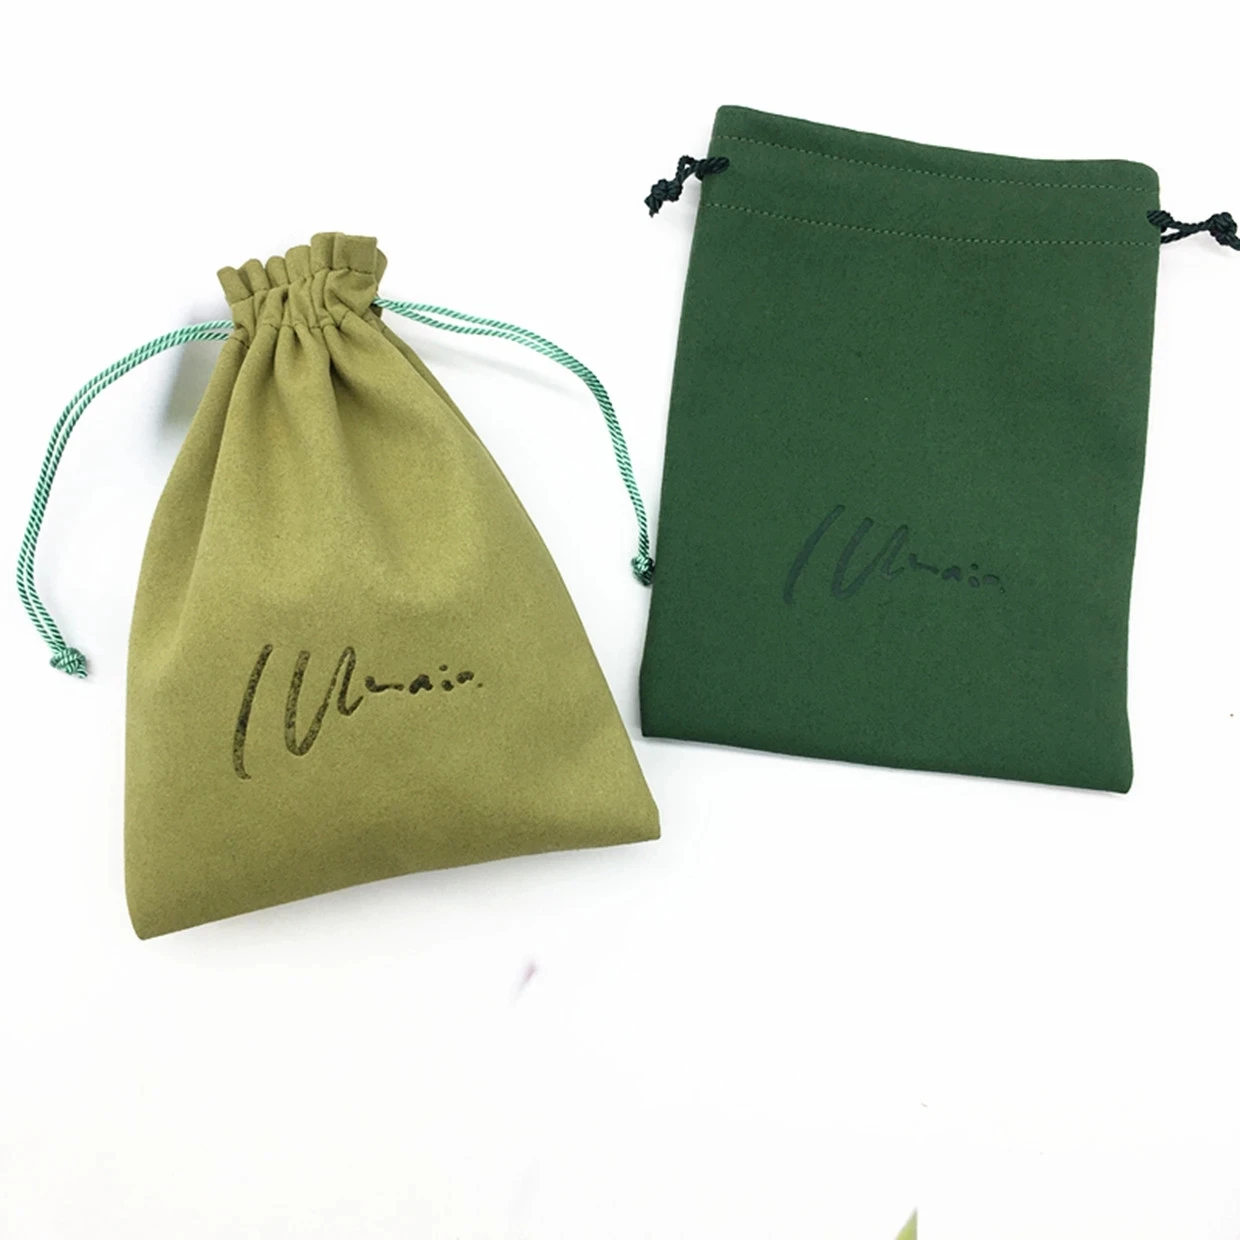 50pcs green microfiber personalized color logo drawstring bags custom bags jewelry bags necklace bags packaging bags